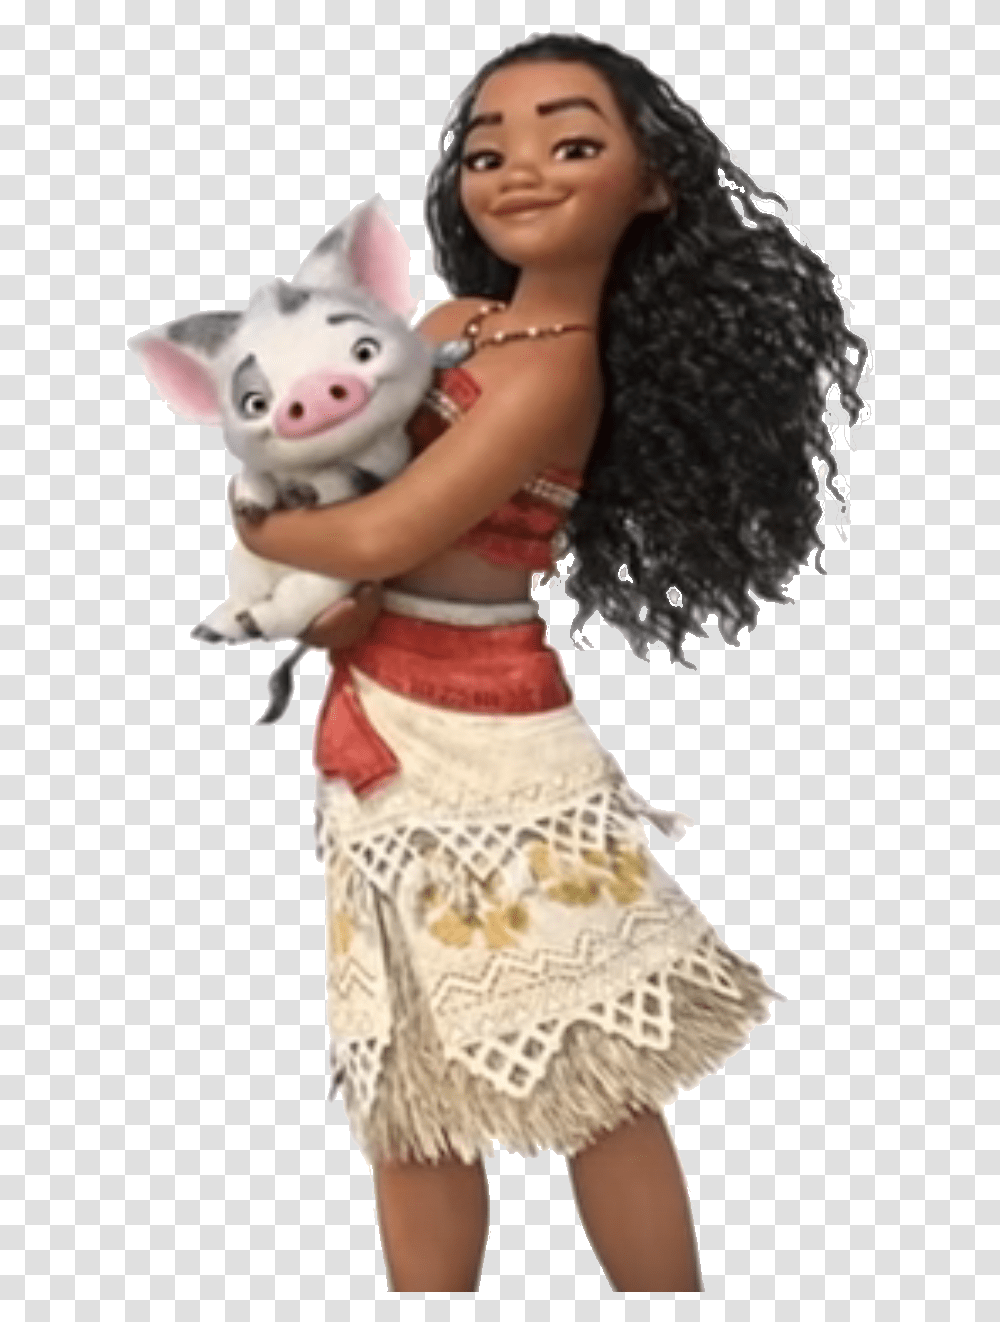 Qopo Moana Background, Person, Toy, Clothing, Doll Transparent Png